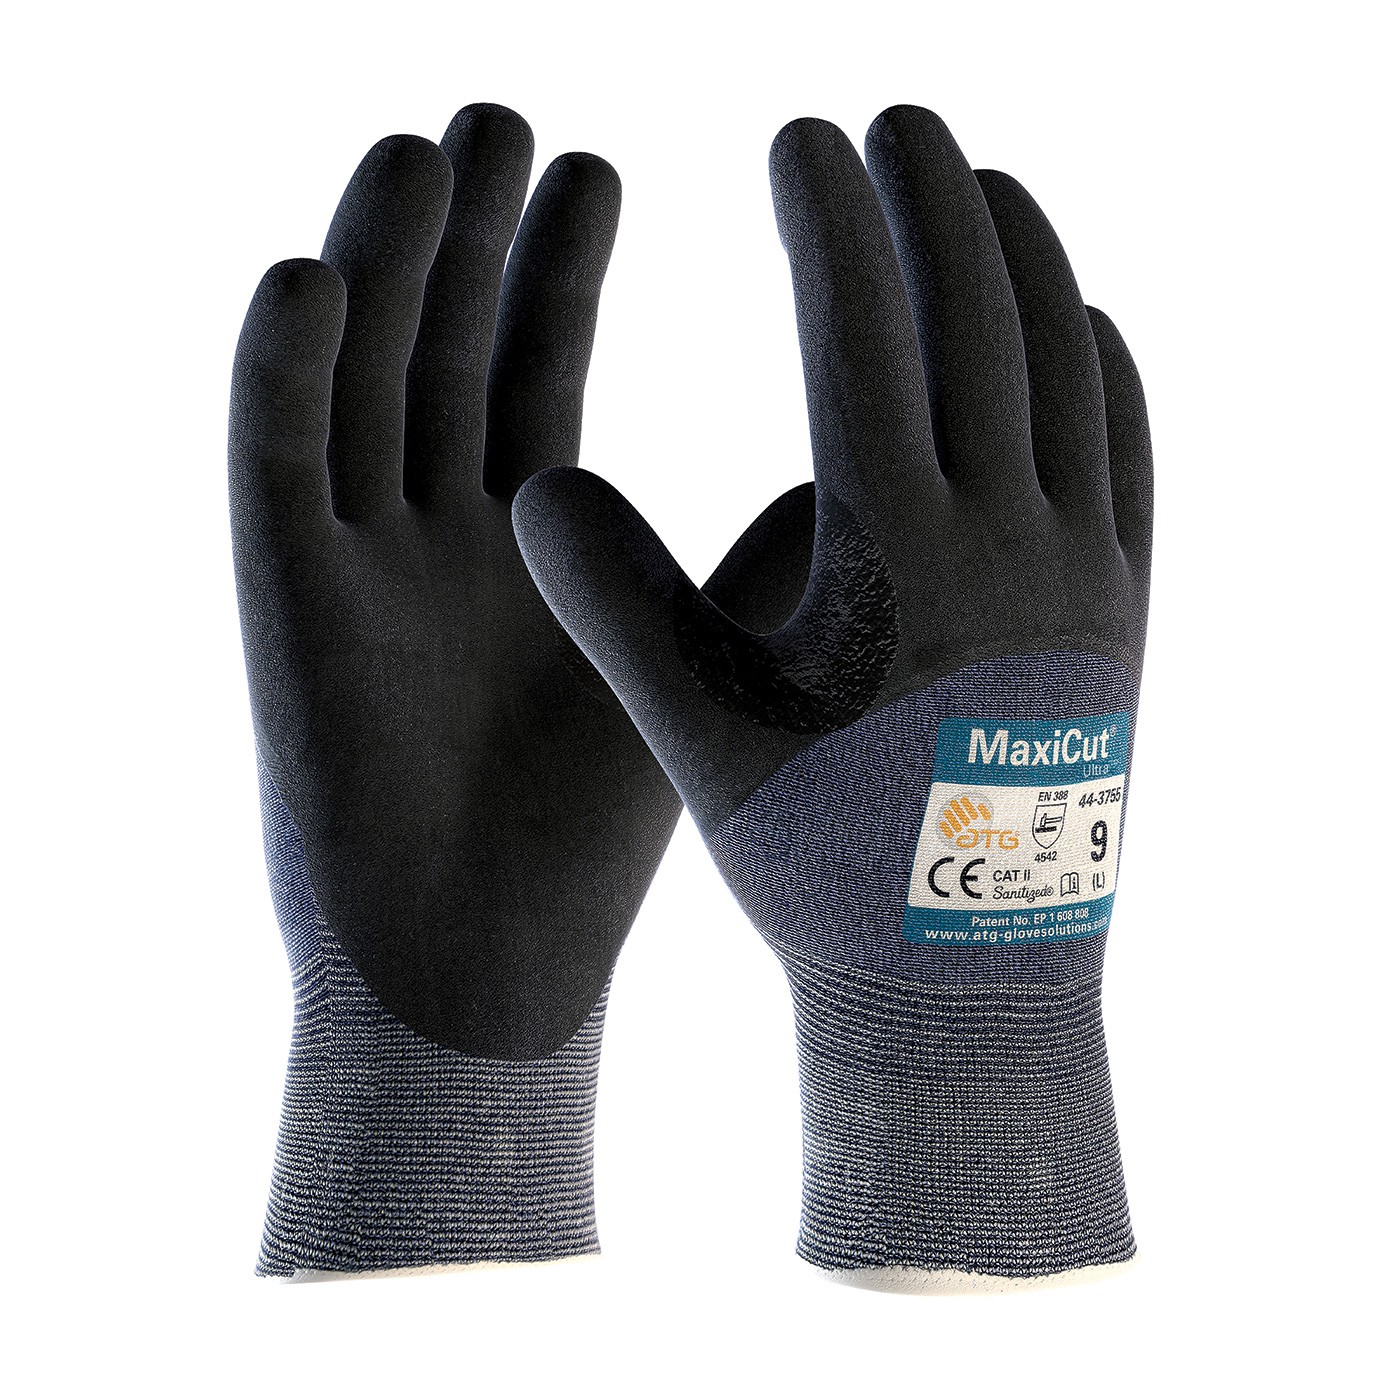 MaxiCut® Ultra™ Seamless Knit Engineered Yarn Glove with Premium Nitrile Coated MicroFoam Grip on Palm, Fingers & Knuckles (#44-3755)